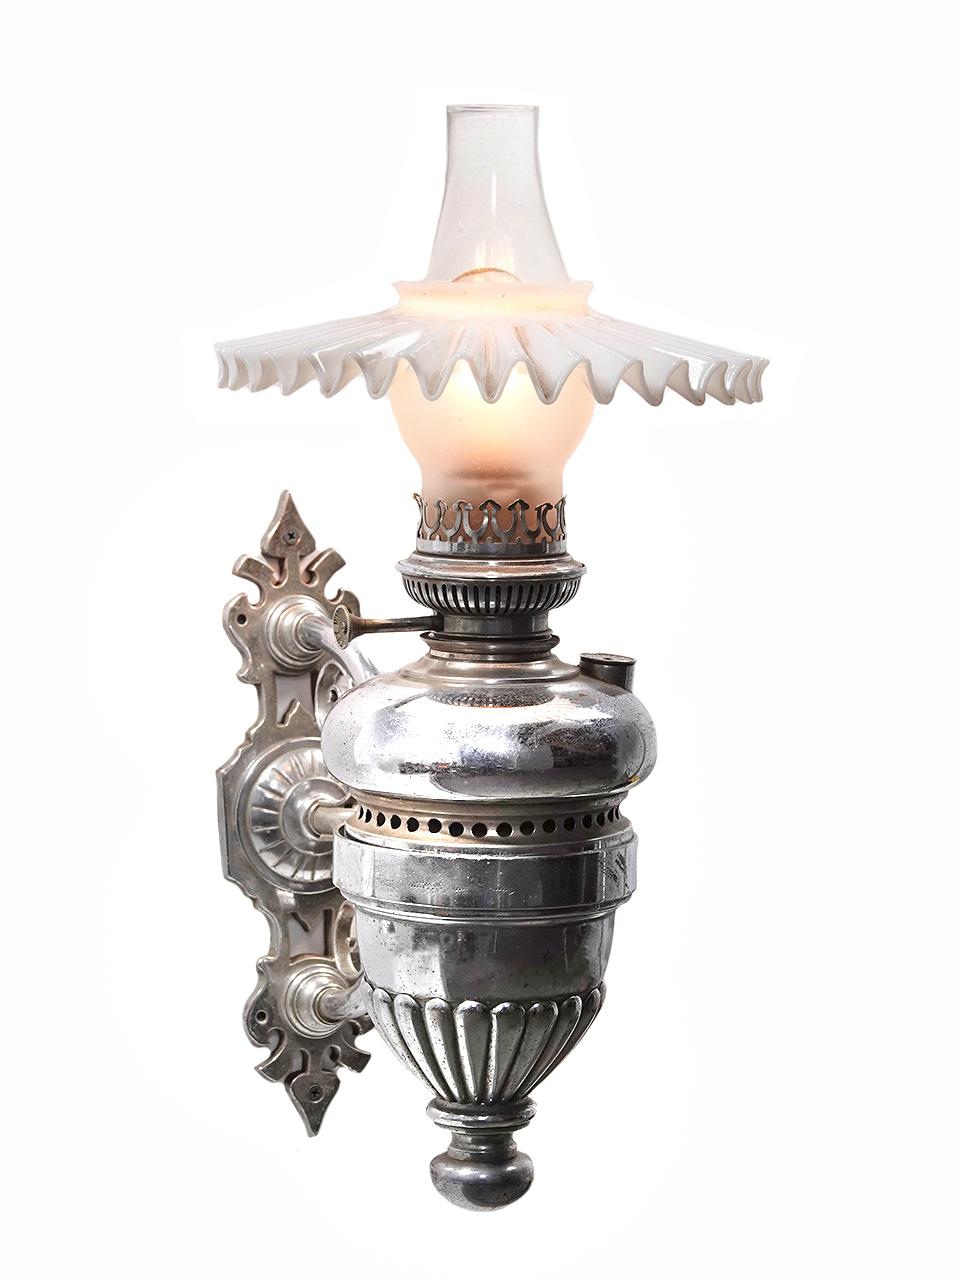 This highly ornate nickel plated lamp is signed and dated. Belgian Lamp Co. 1884. I has the feel of a railroad Pullman car sconce but cant say for sure. This must be the fanciest example we have offered and have never seen another. The finish is